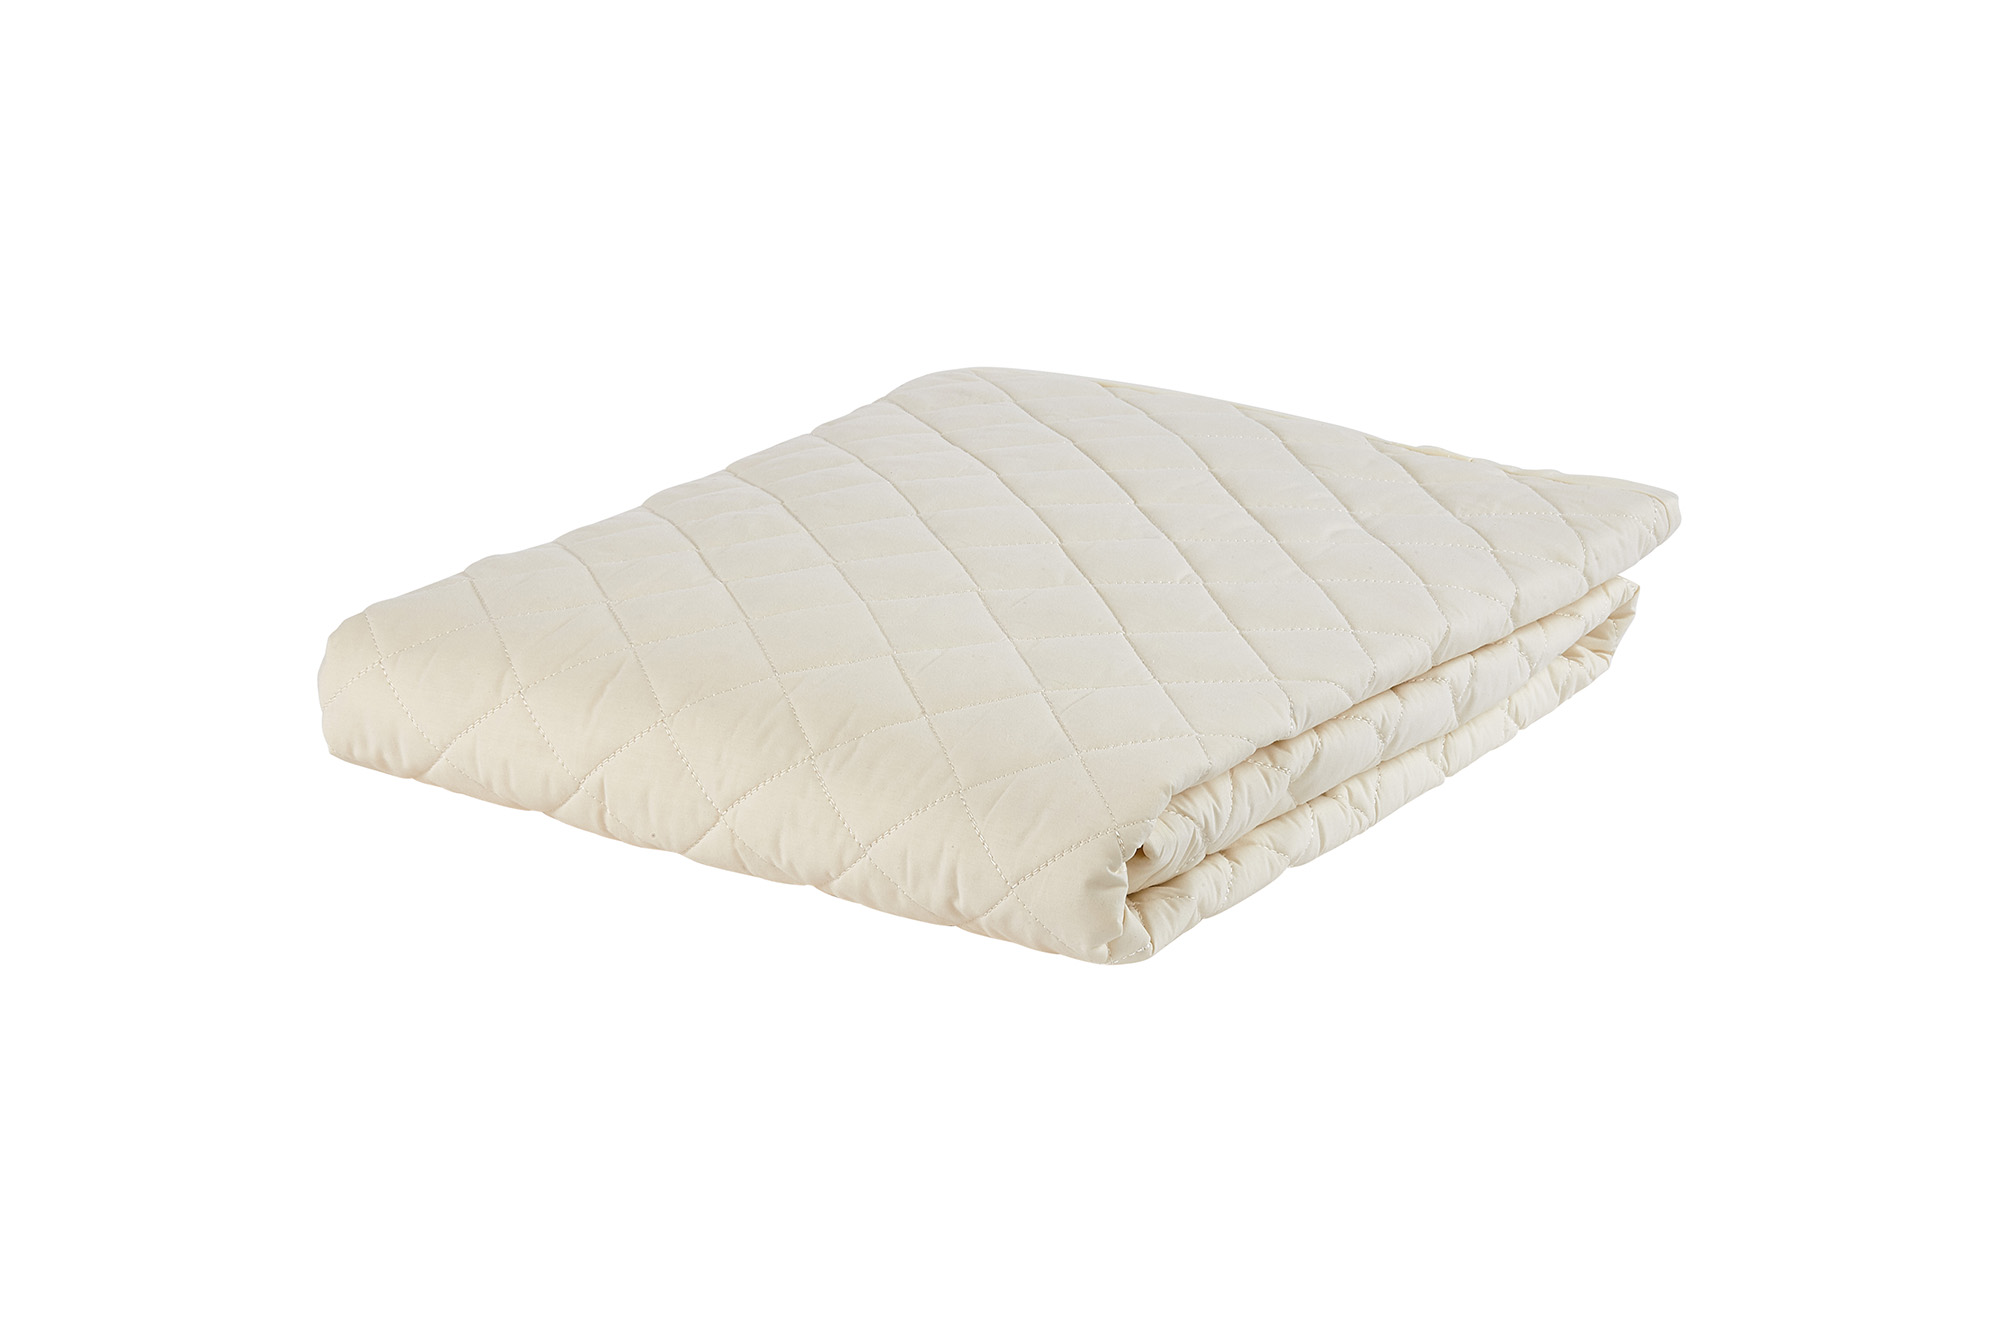 SINGLE BED SIZE WOOL MATTRESS PROTECTOR Made by Fogarty 180 GSM Slight Second 